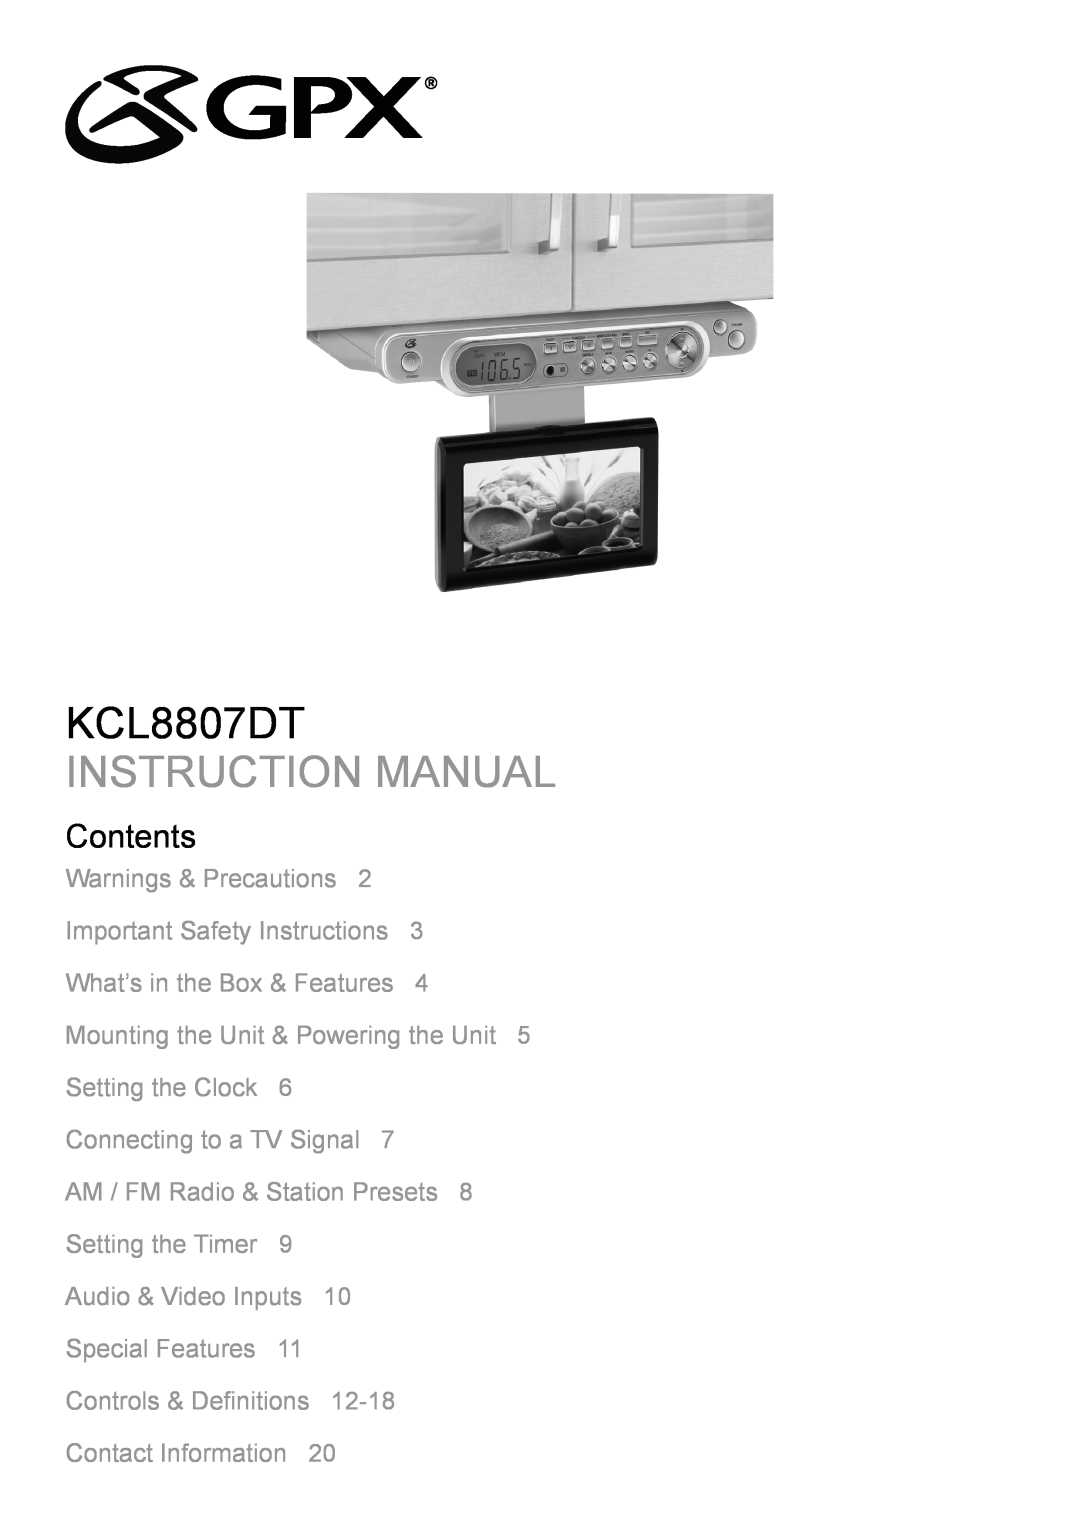 GPX KCL8807DT instruction manual Instruction Manual, Contents 